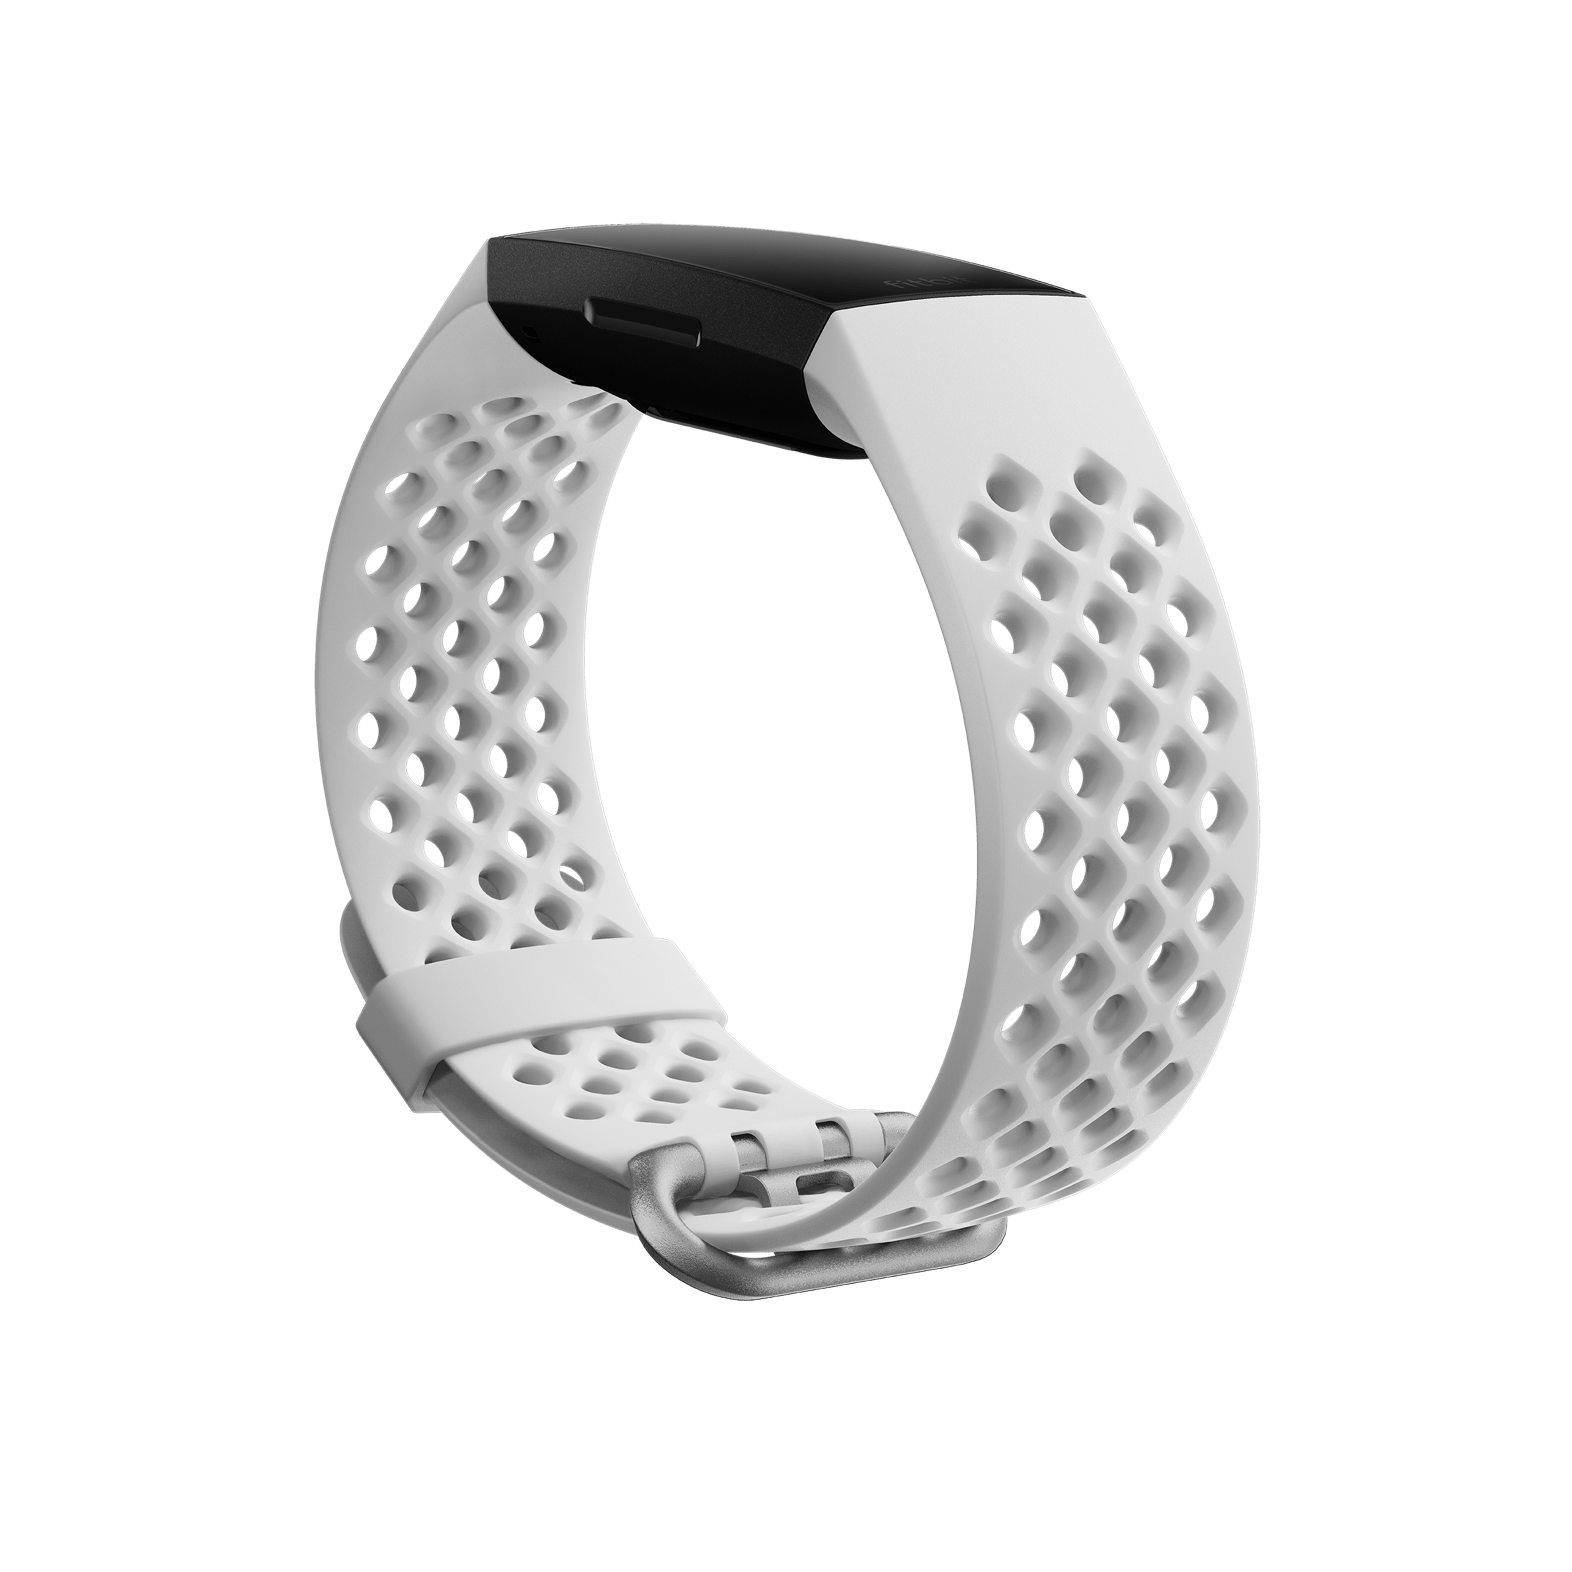 fitbit charge 3 sport